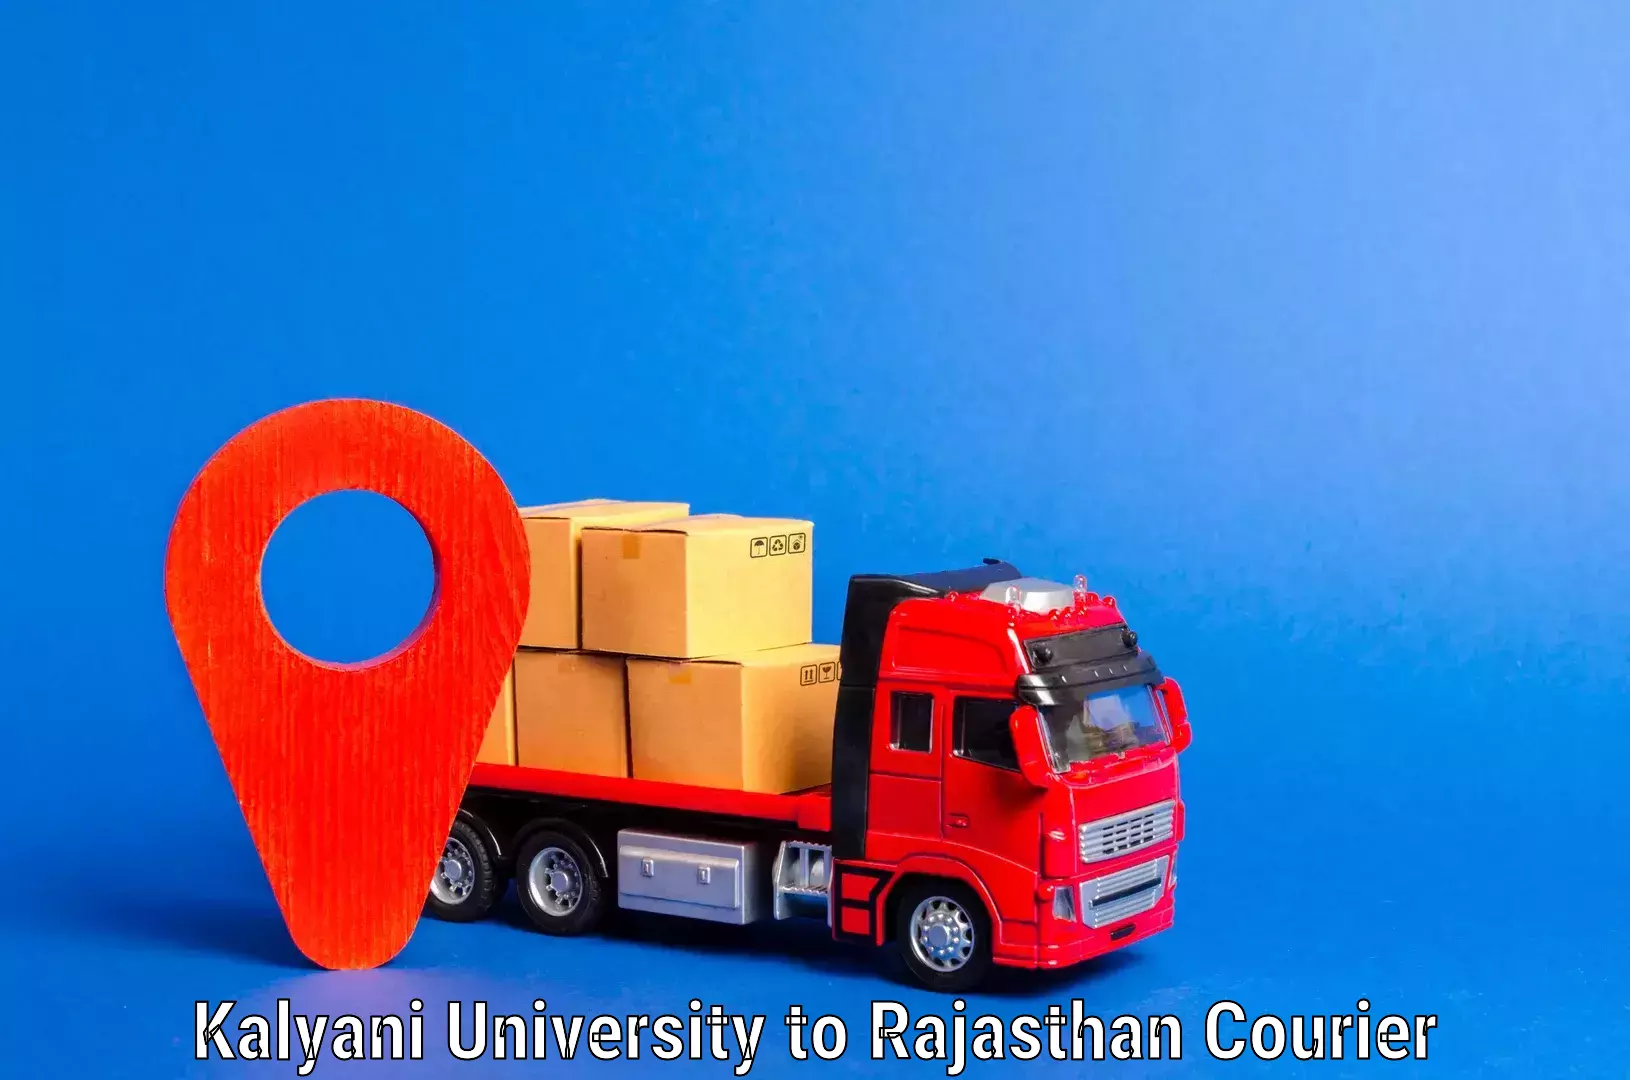 Efficient relocation services in Kalyani University to Rajasthan